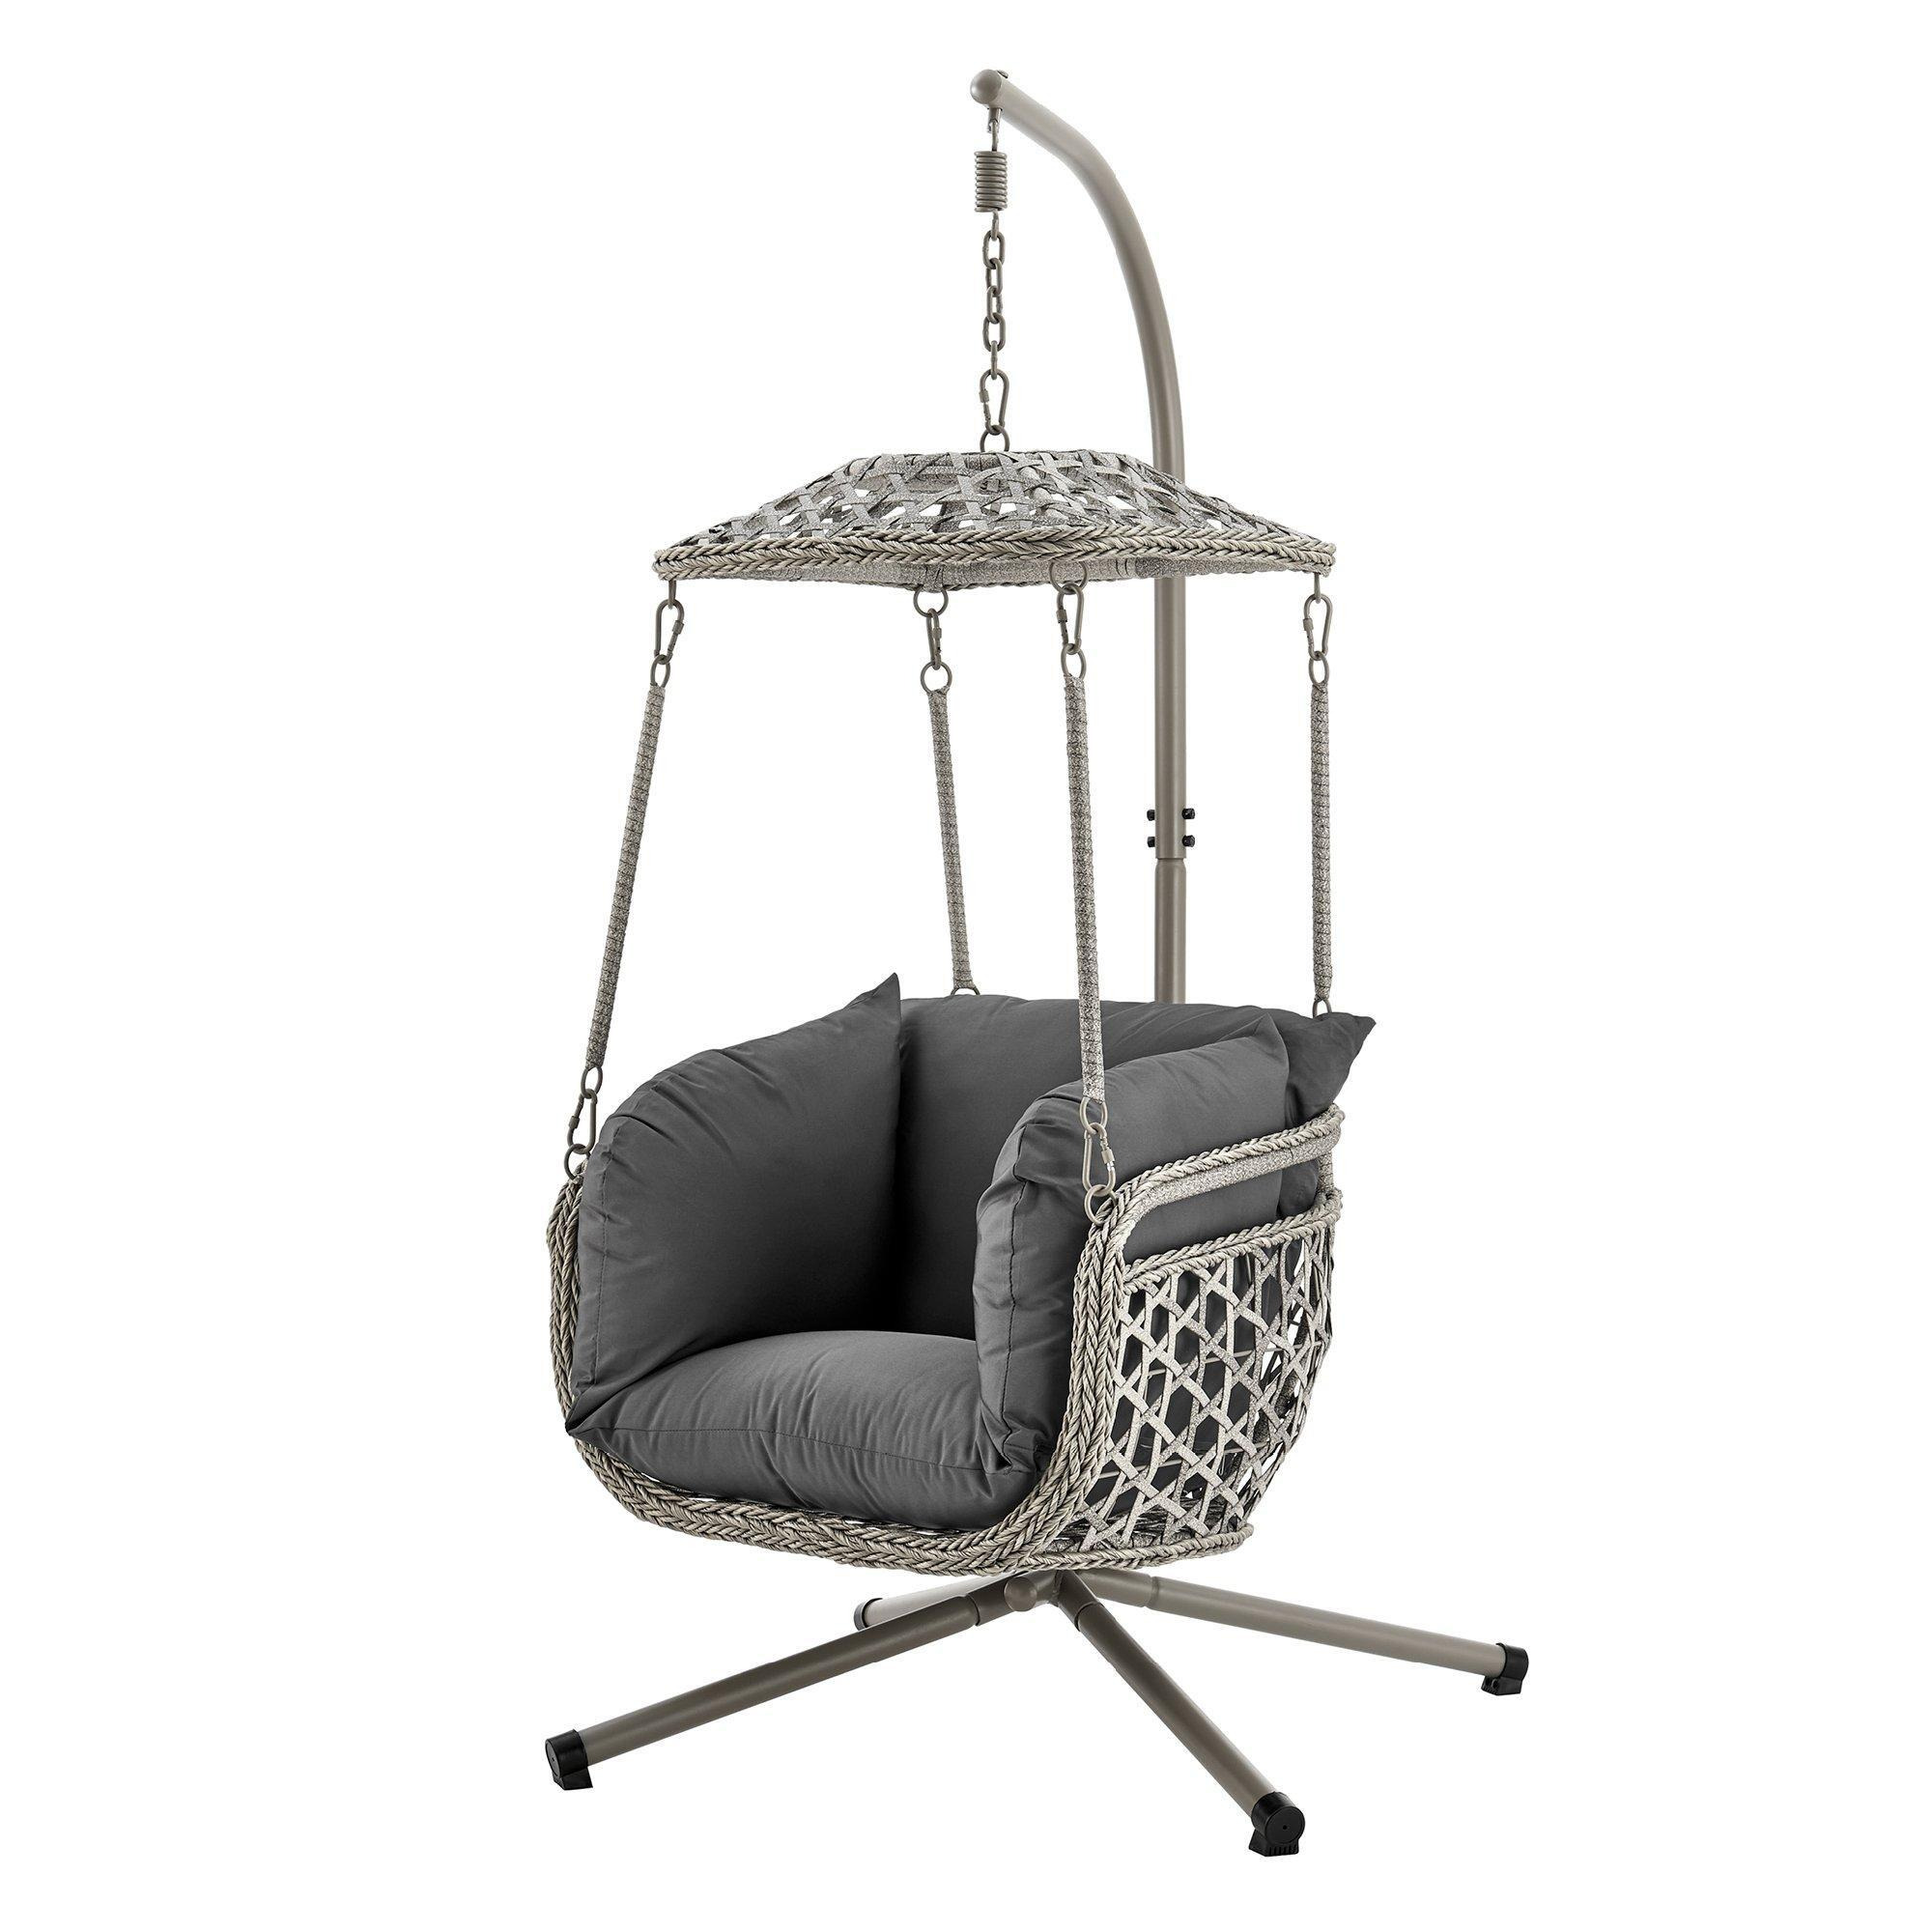 Kira Hanging Rattan Swing Chair with Canopy - image 1